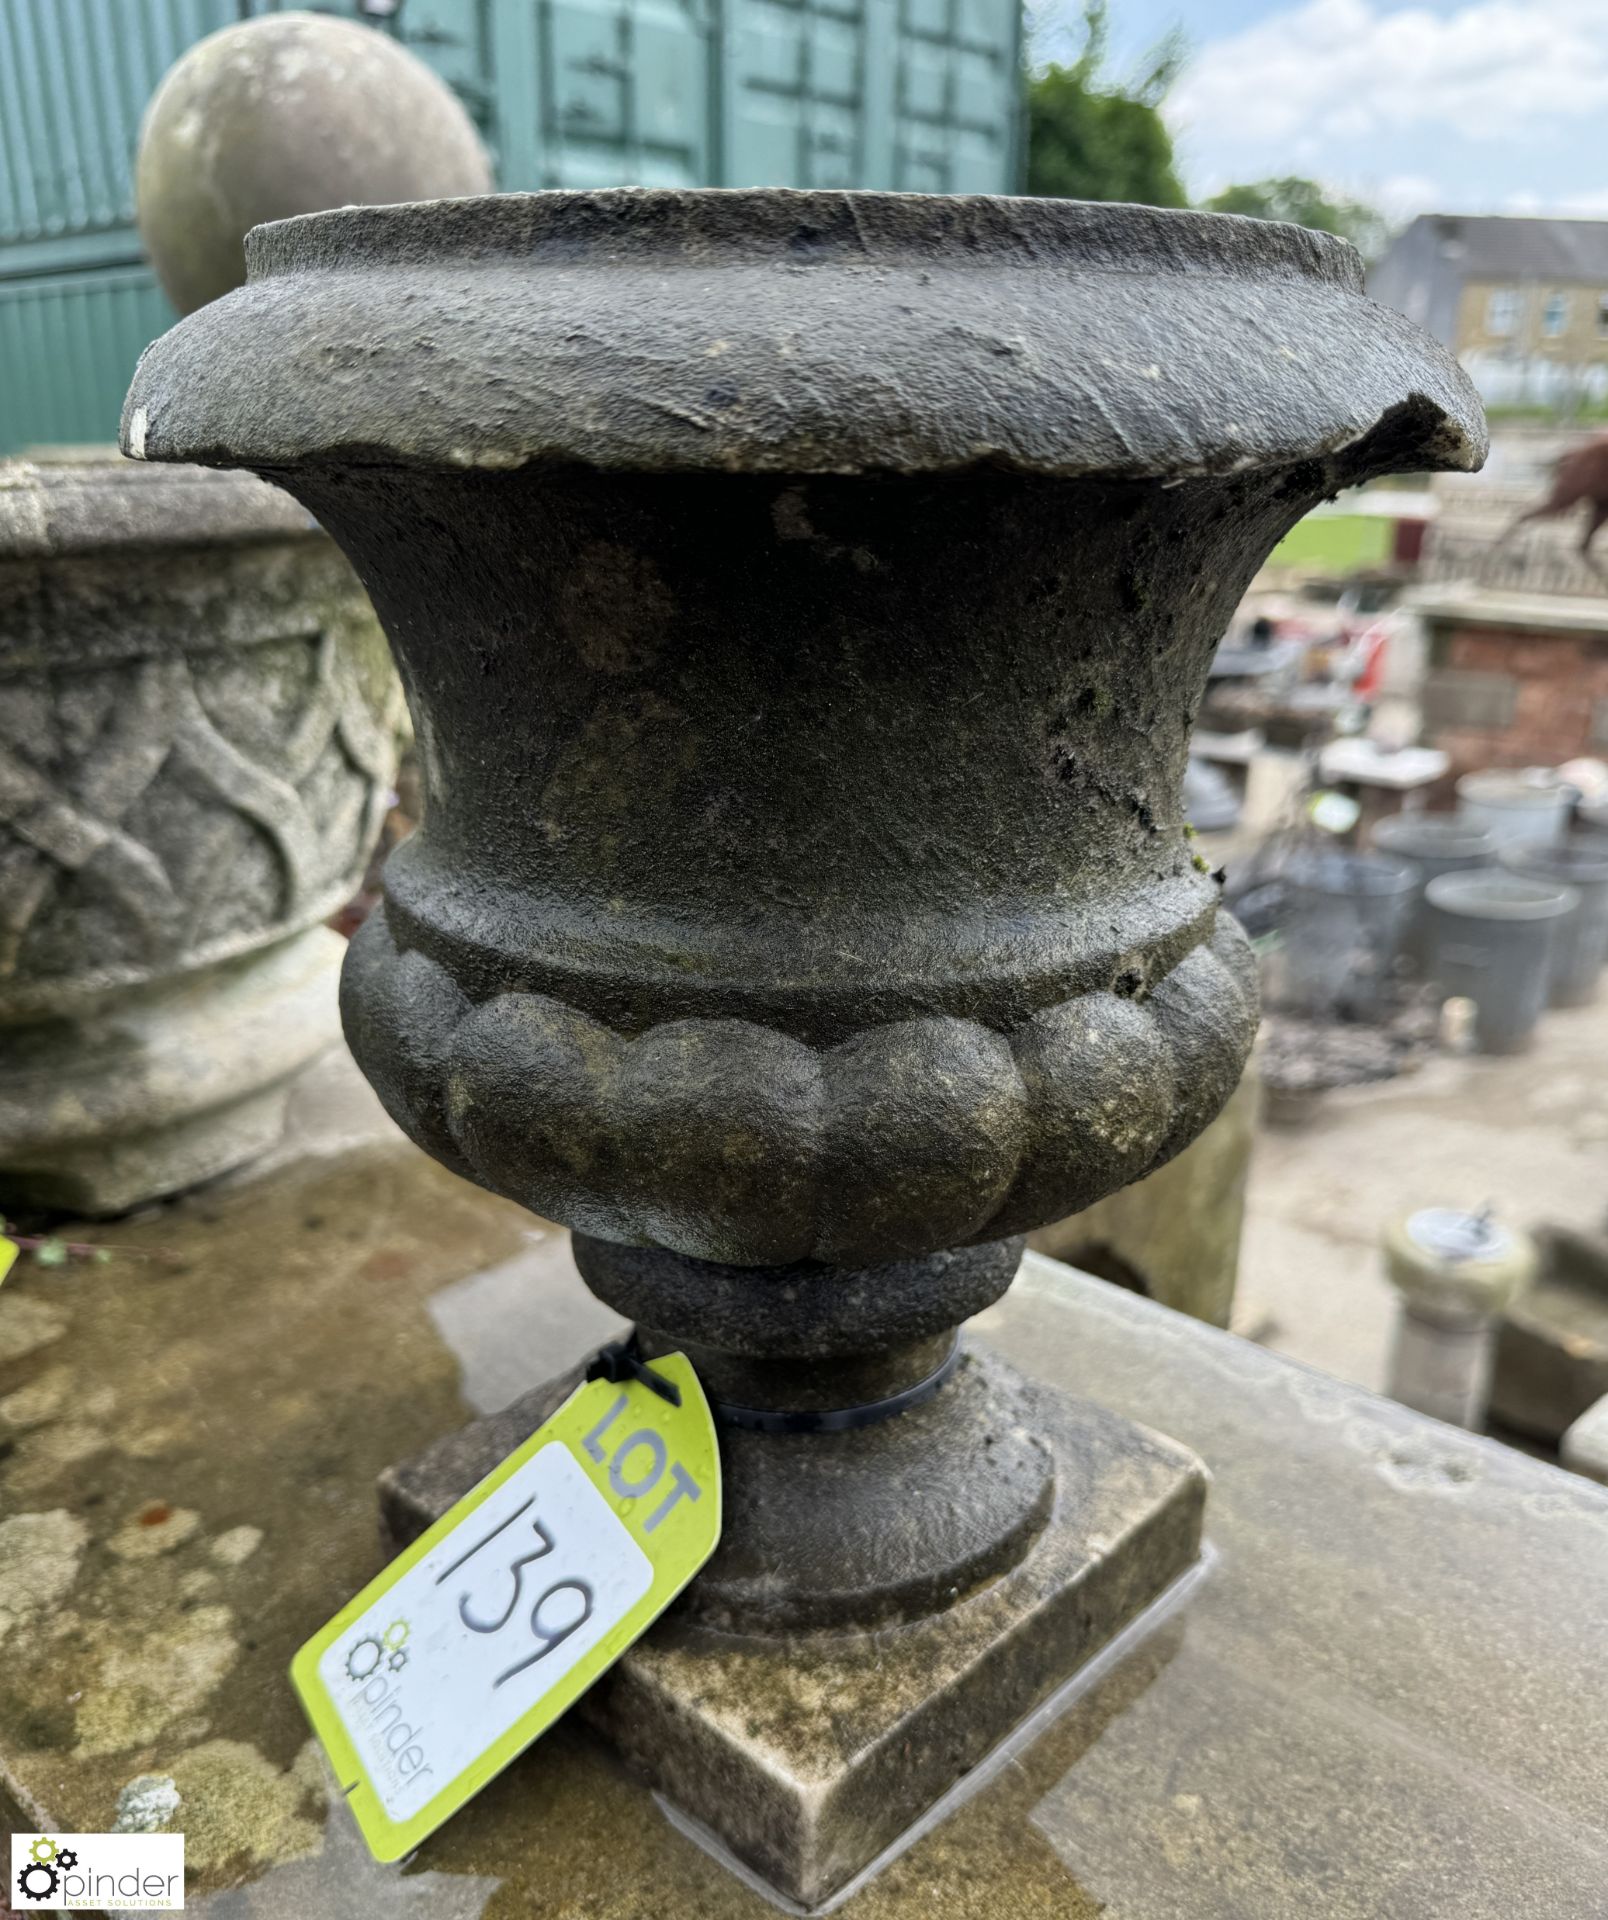 A Victorian statuary white marble Garden Urn, with gadrooning decoration, approx. 12in x 10in